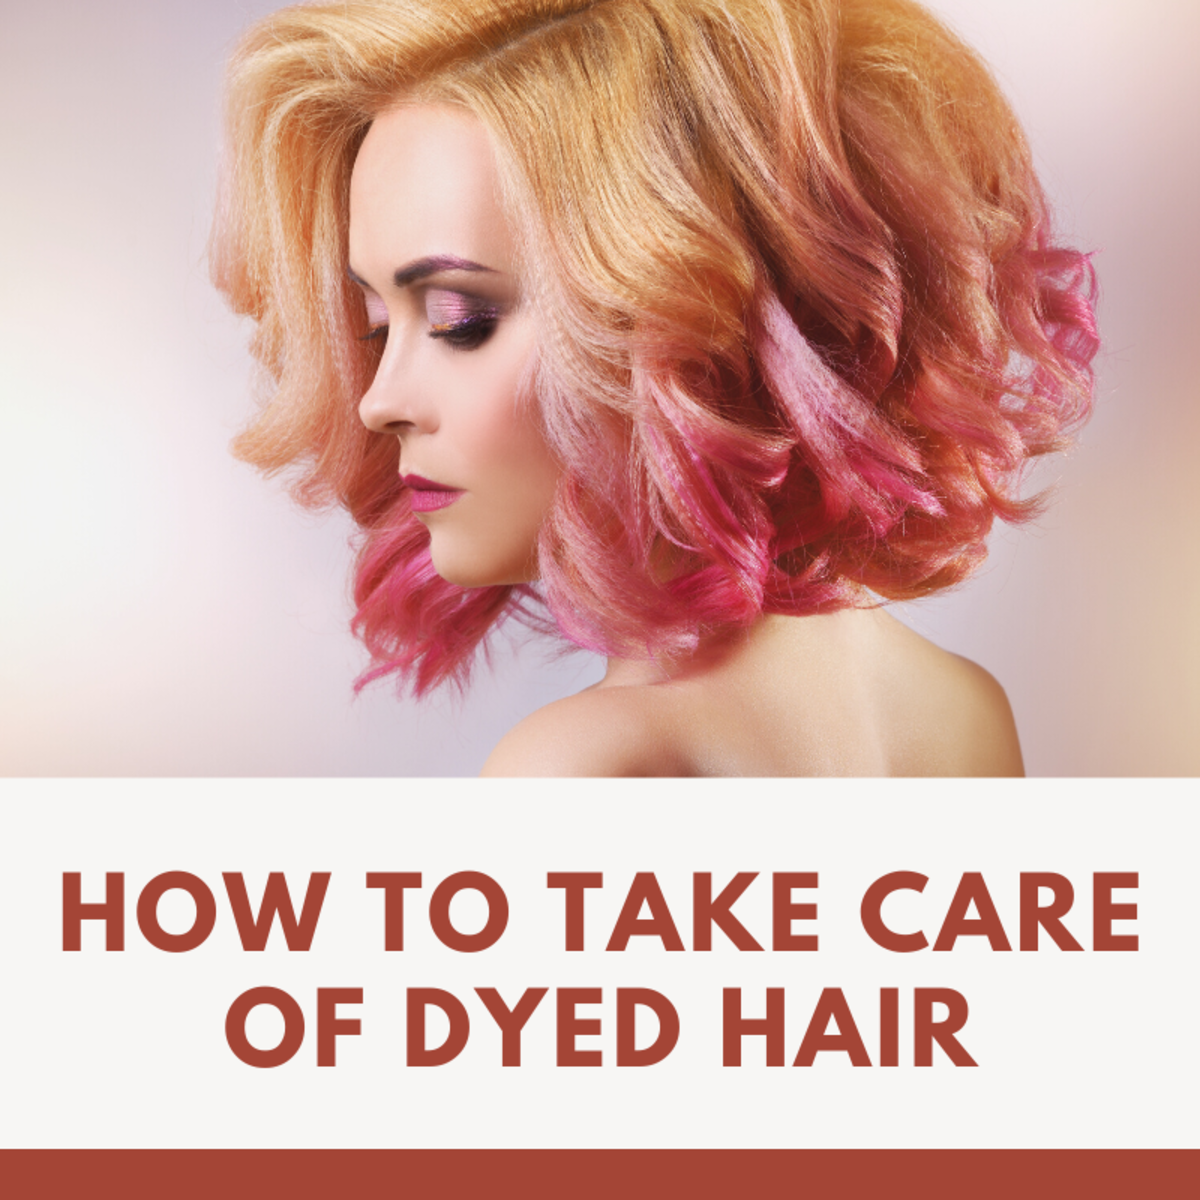 How to Take Care of Dyed Hair